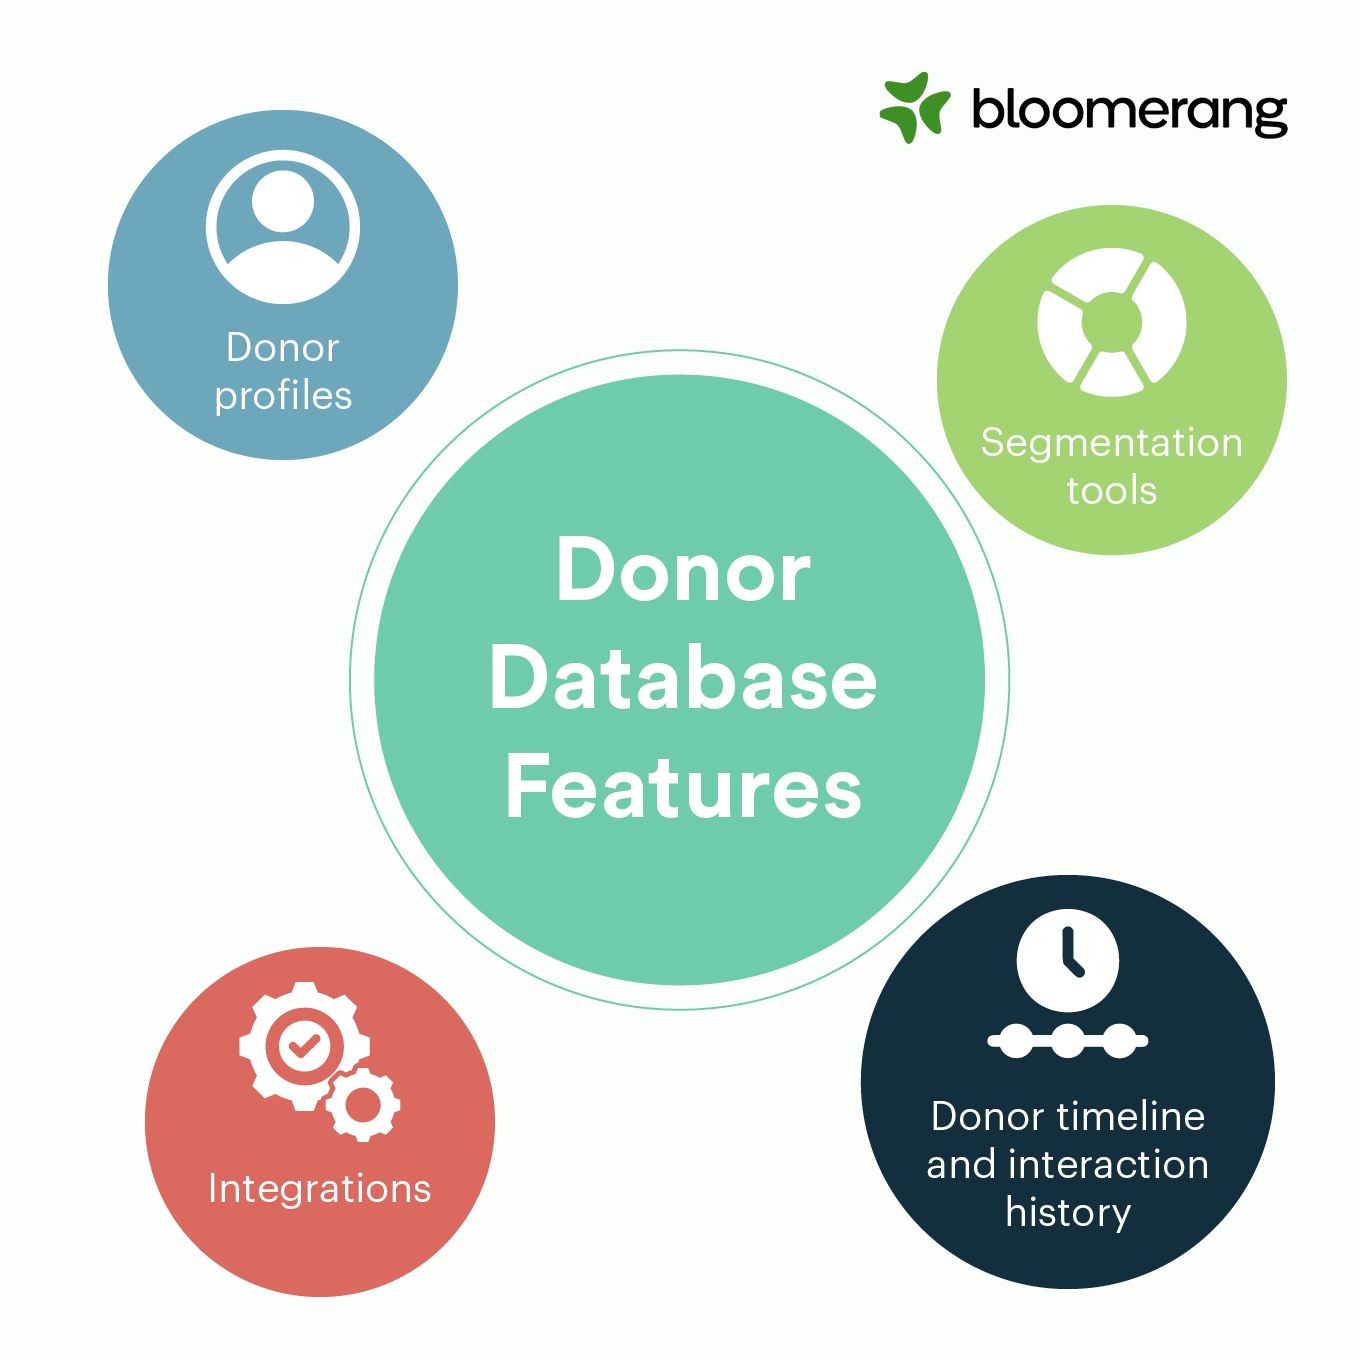 This image shows common donor database features (outlined in the bulleted list below). 